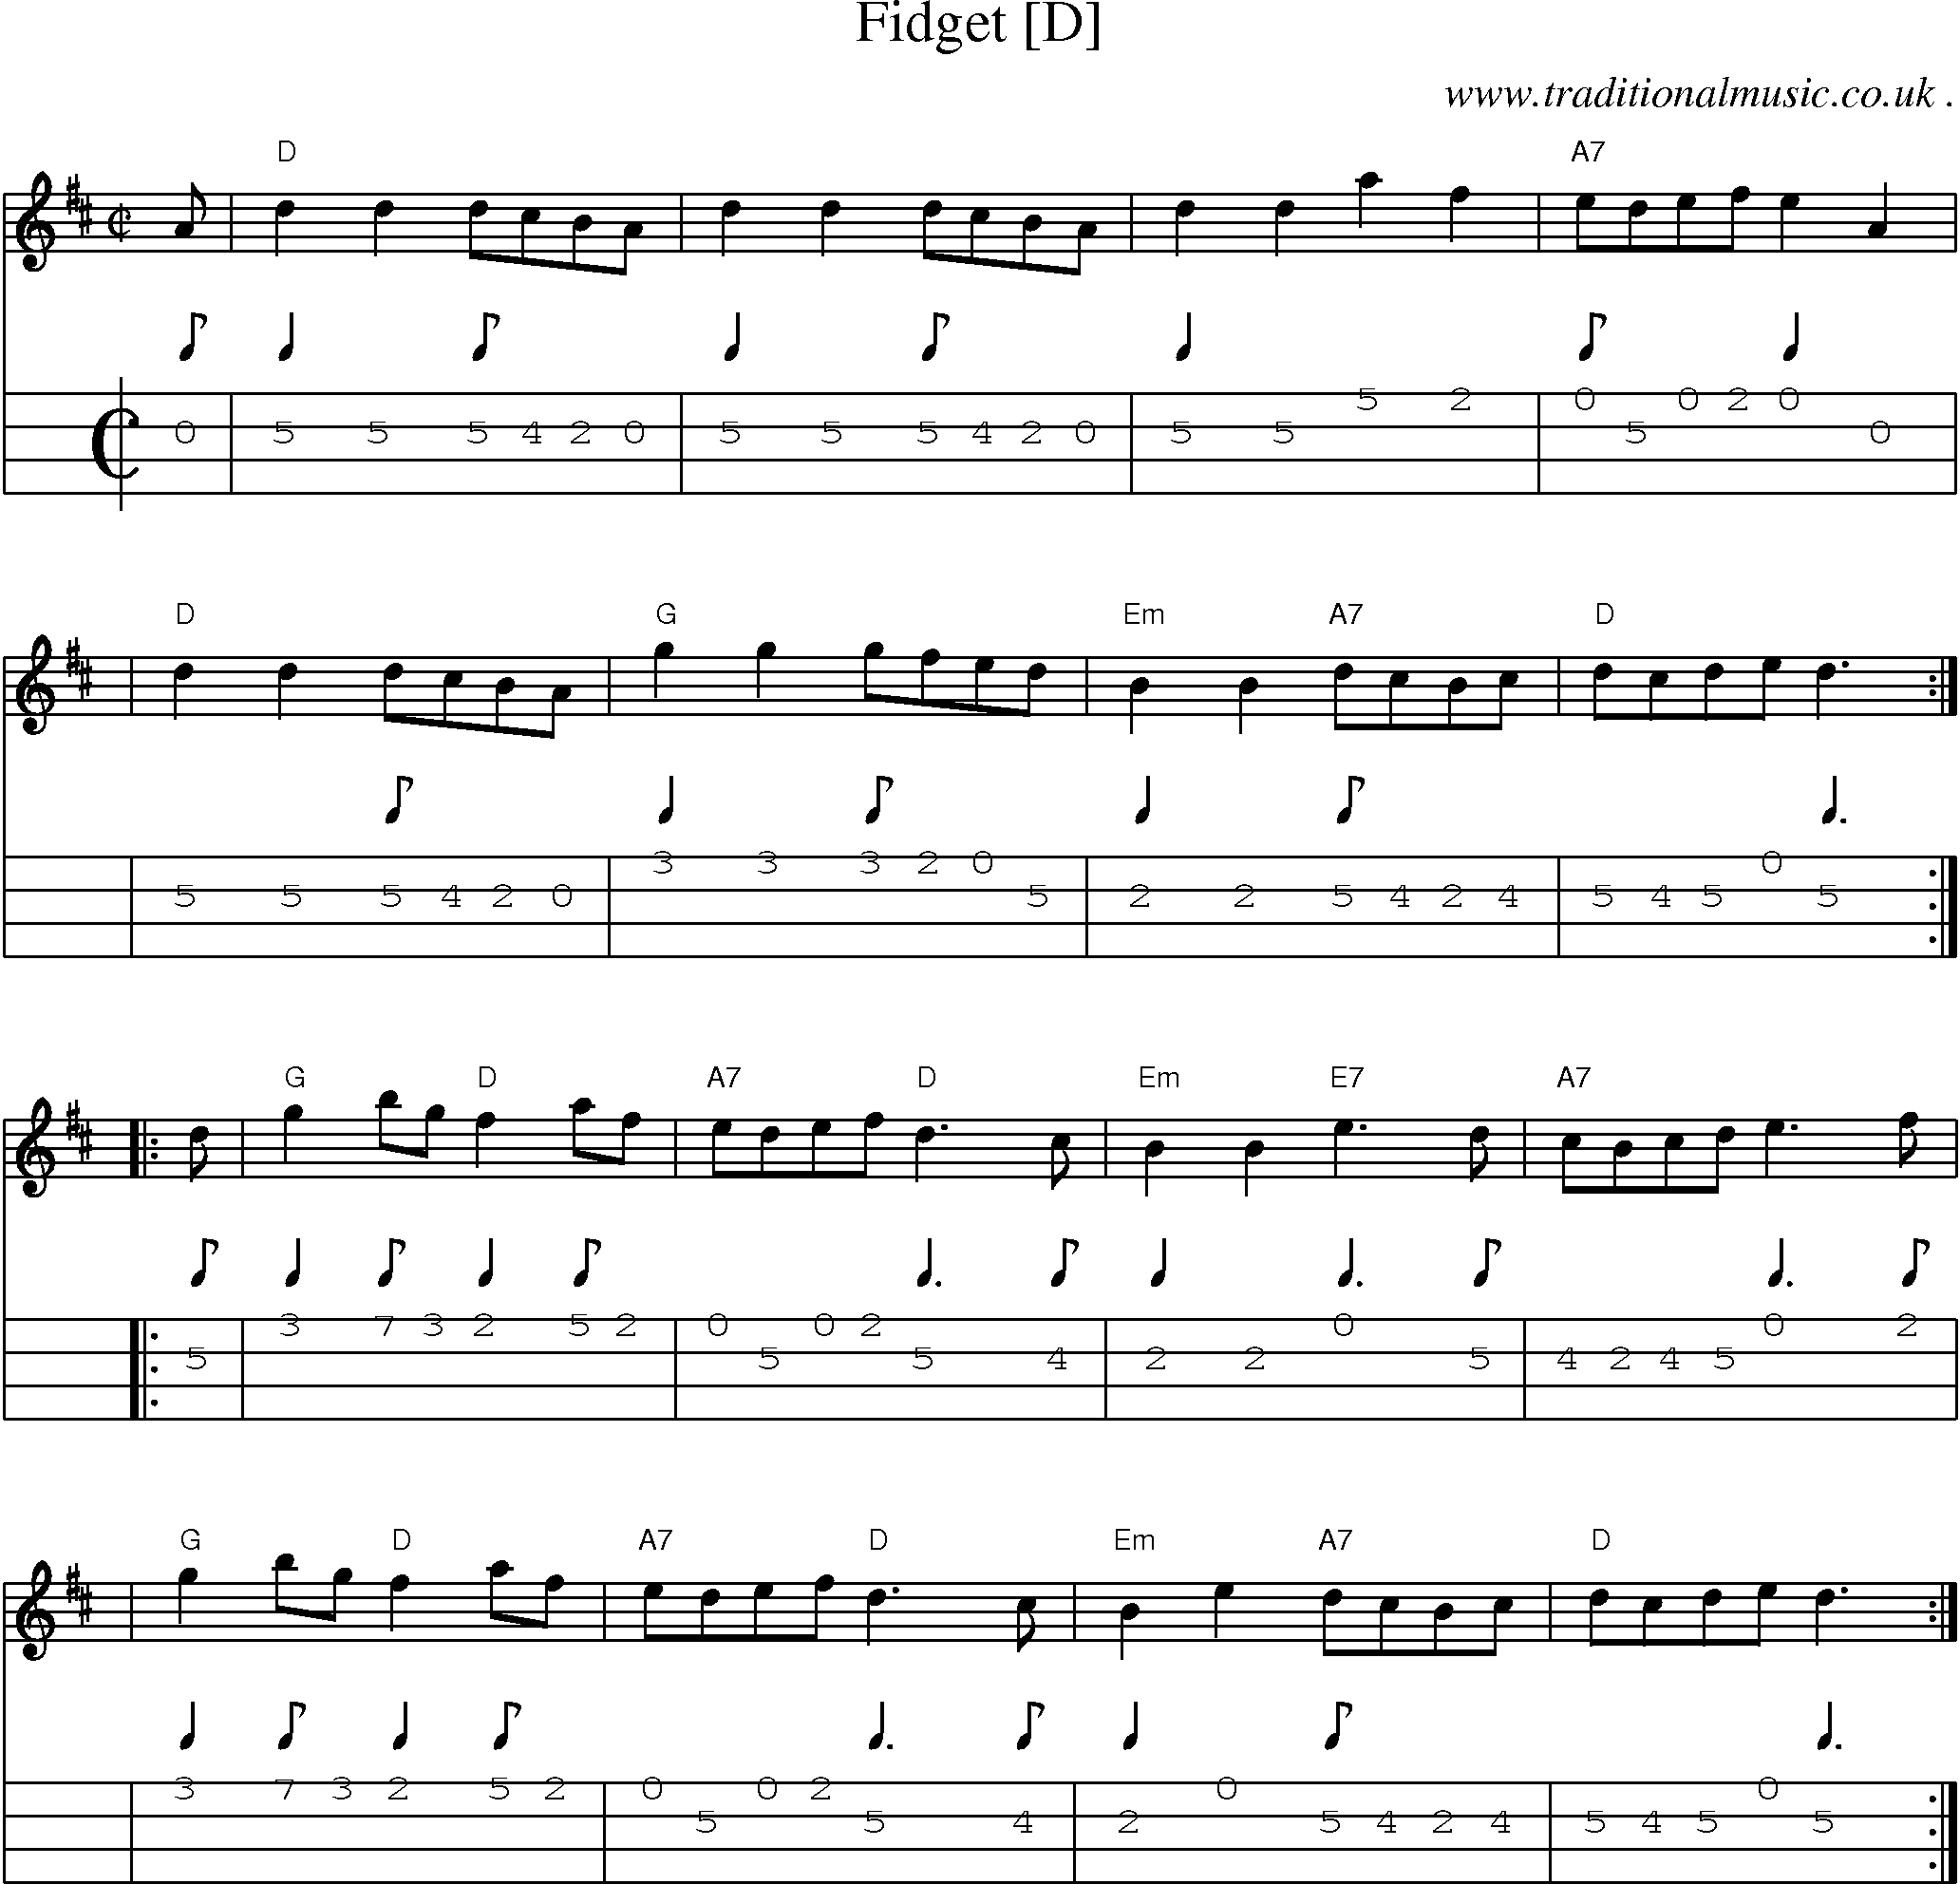 Sheet-music  score, Chords and Mandolin Tabs for Fidget [d]